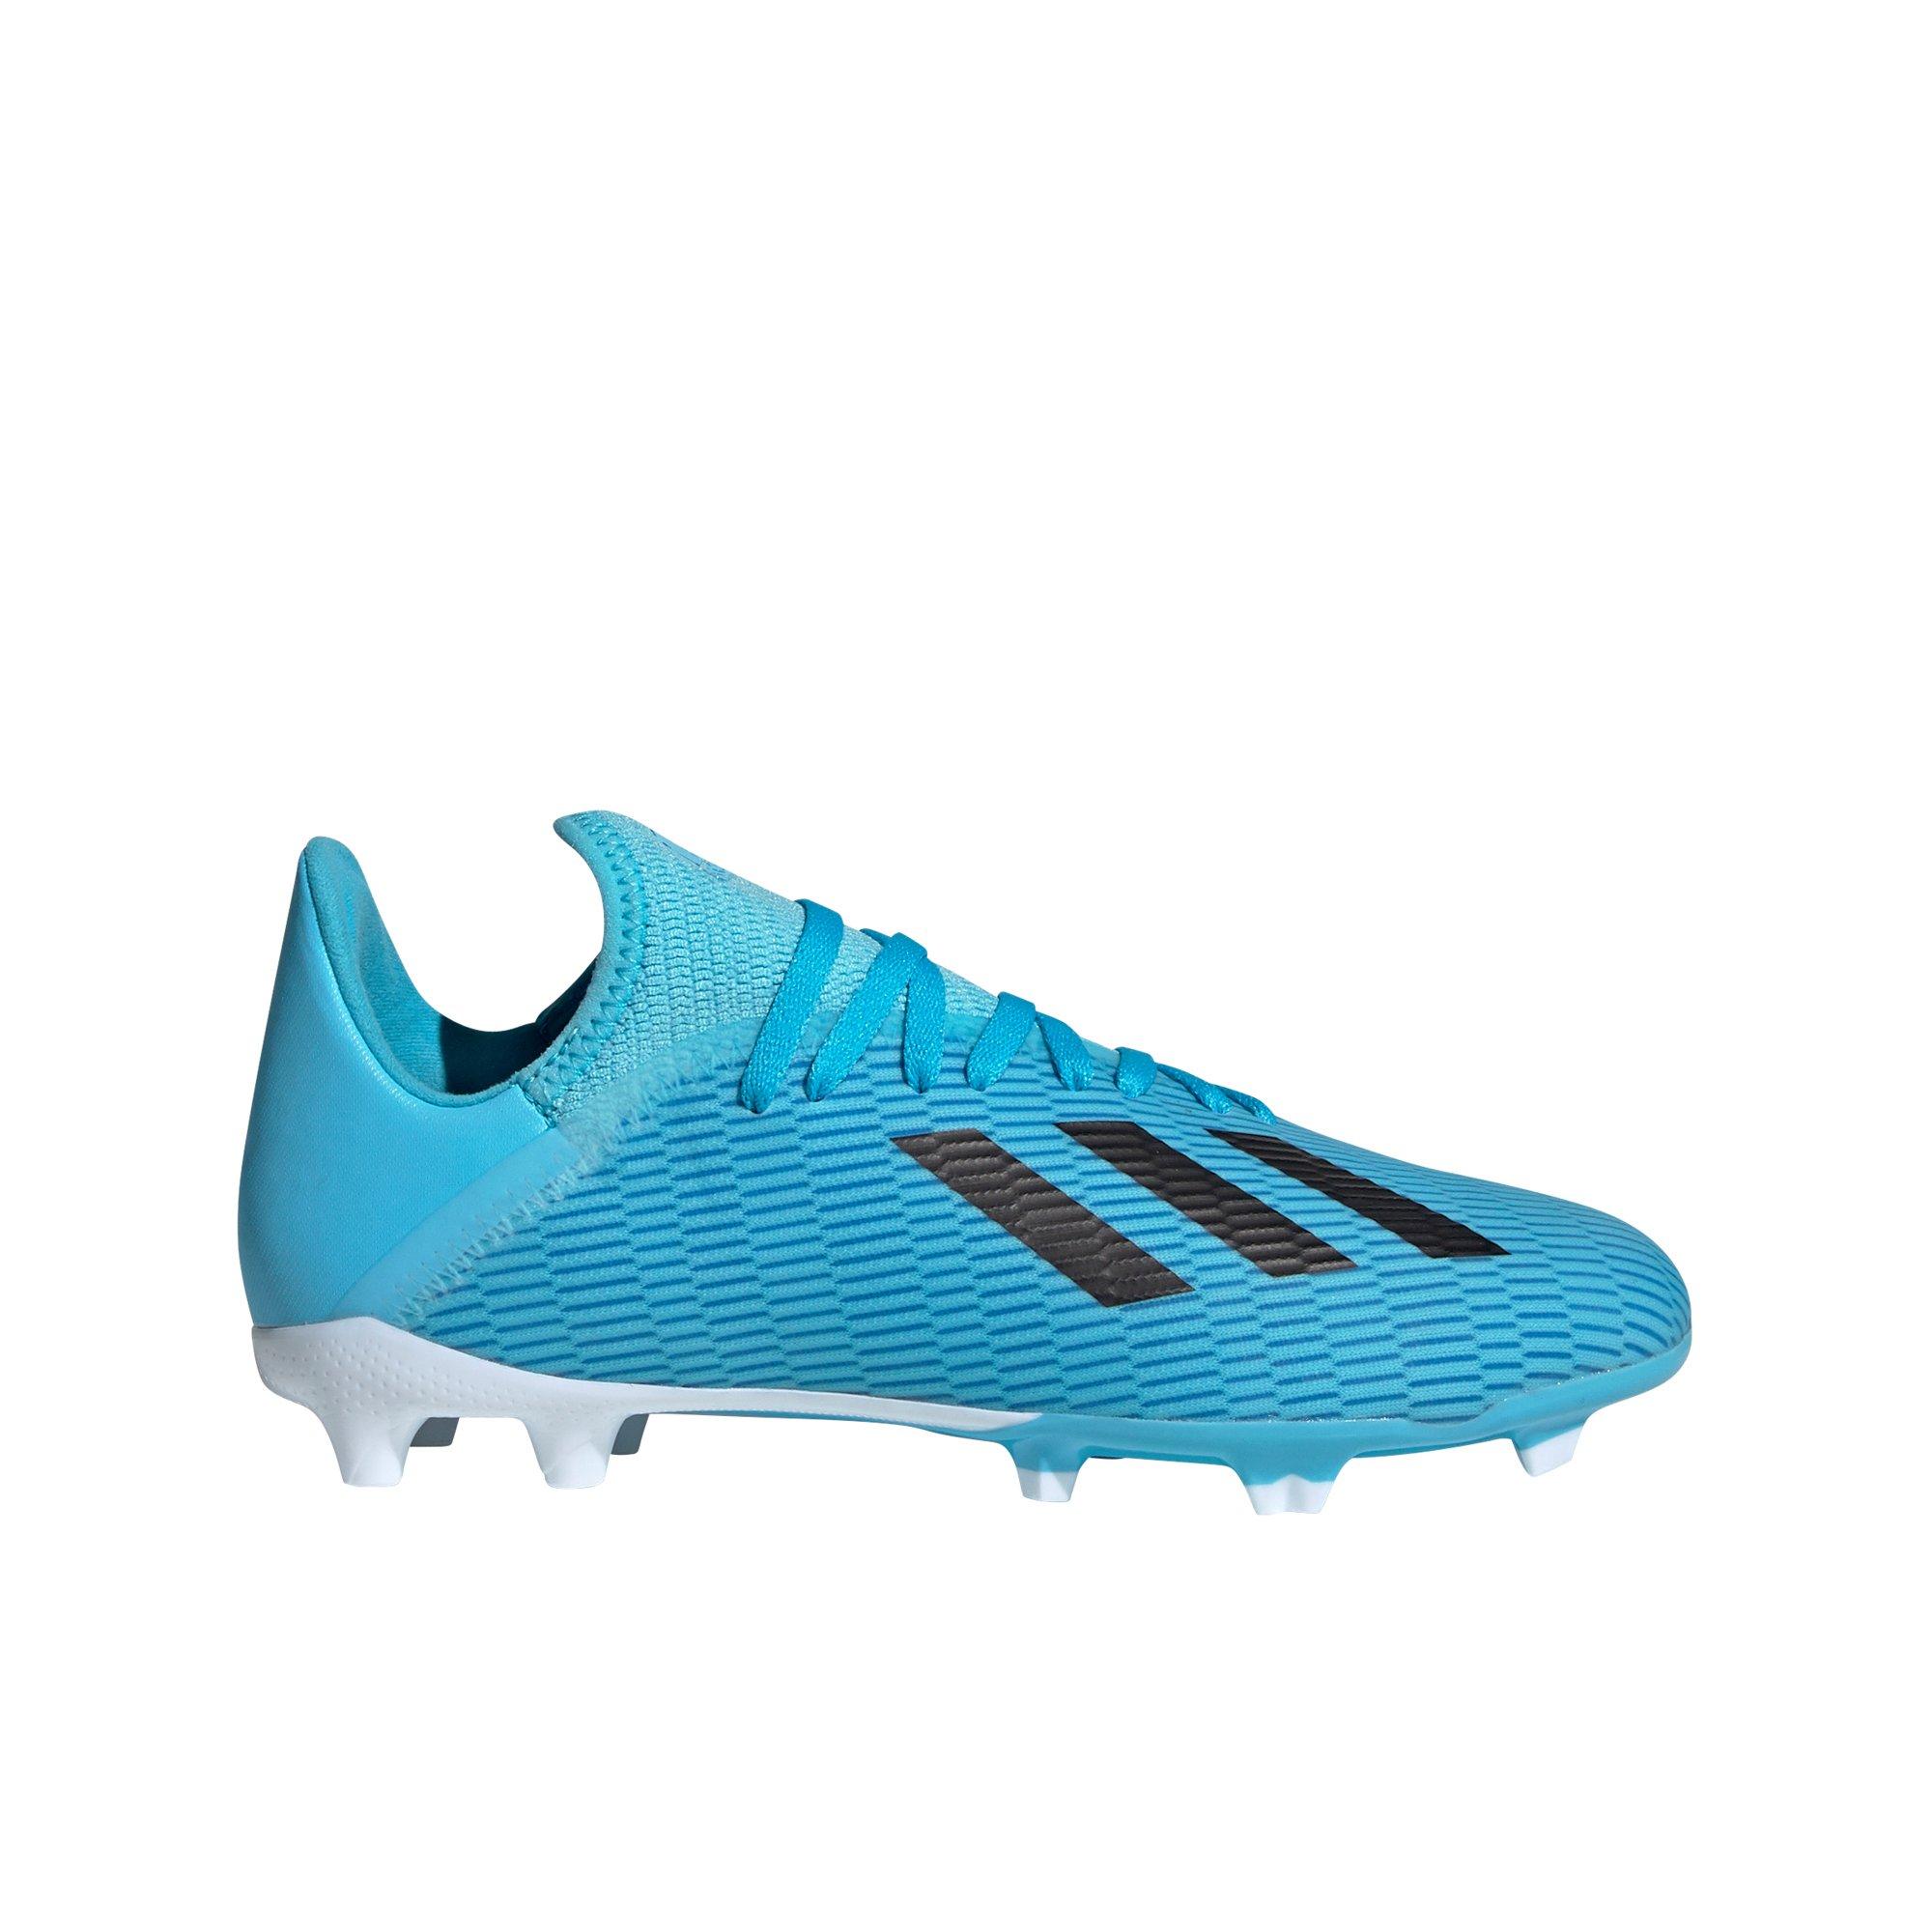 adidas blue and white soccer cleats